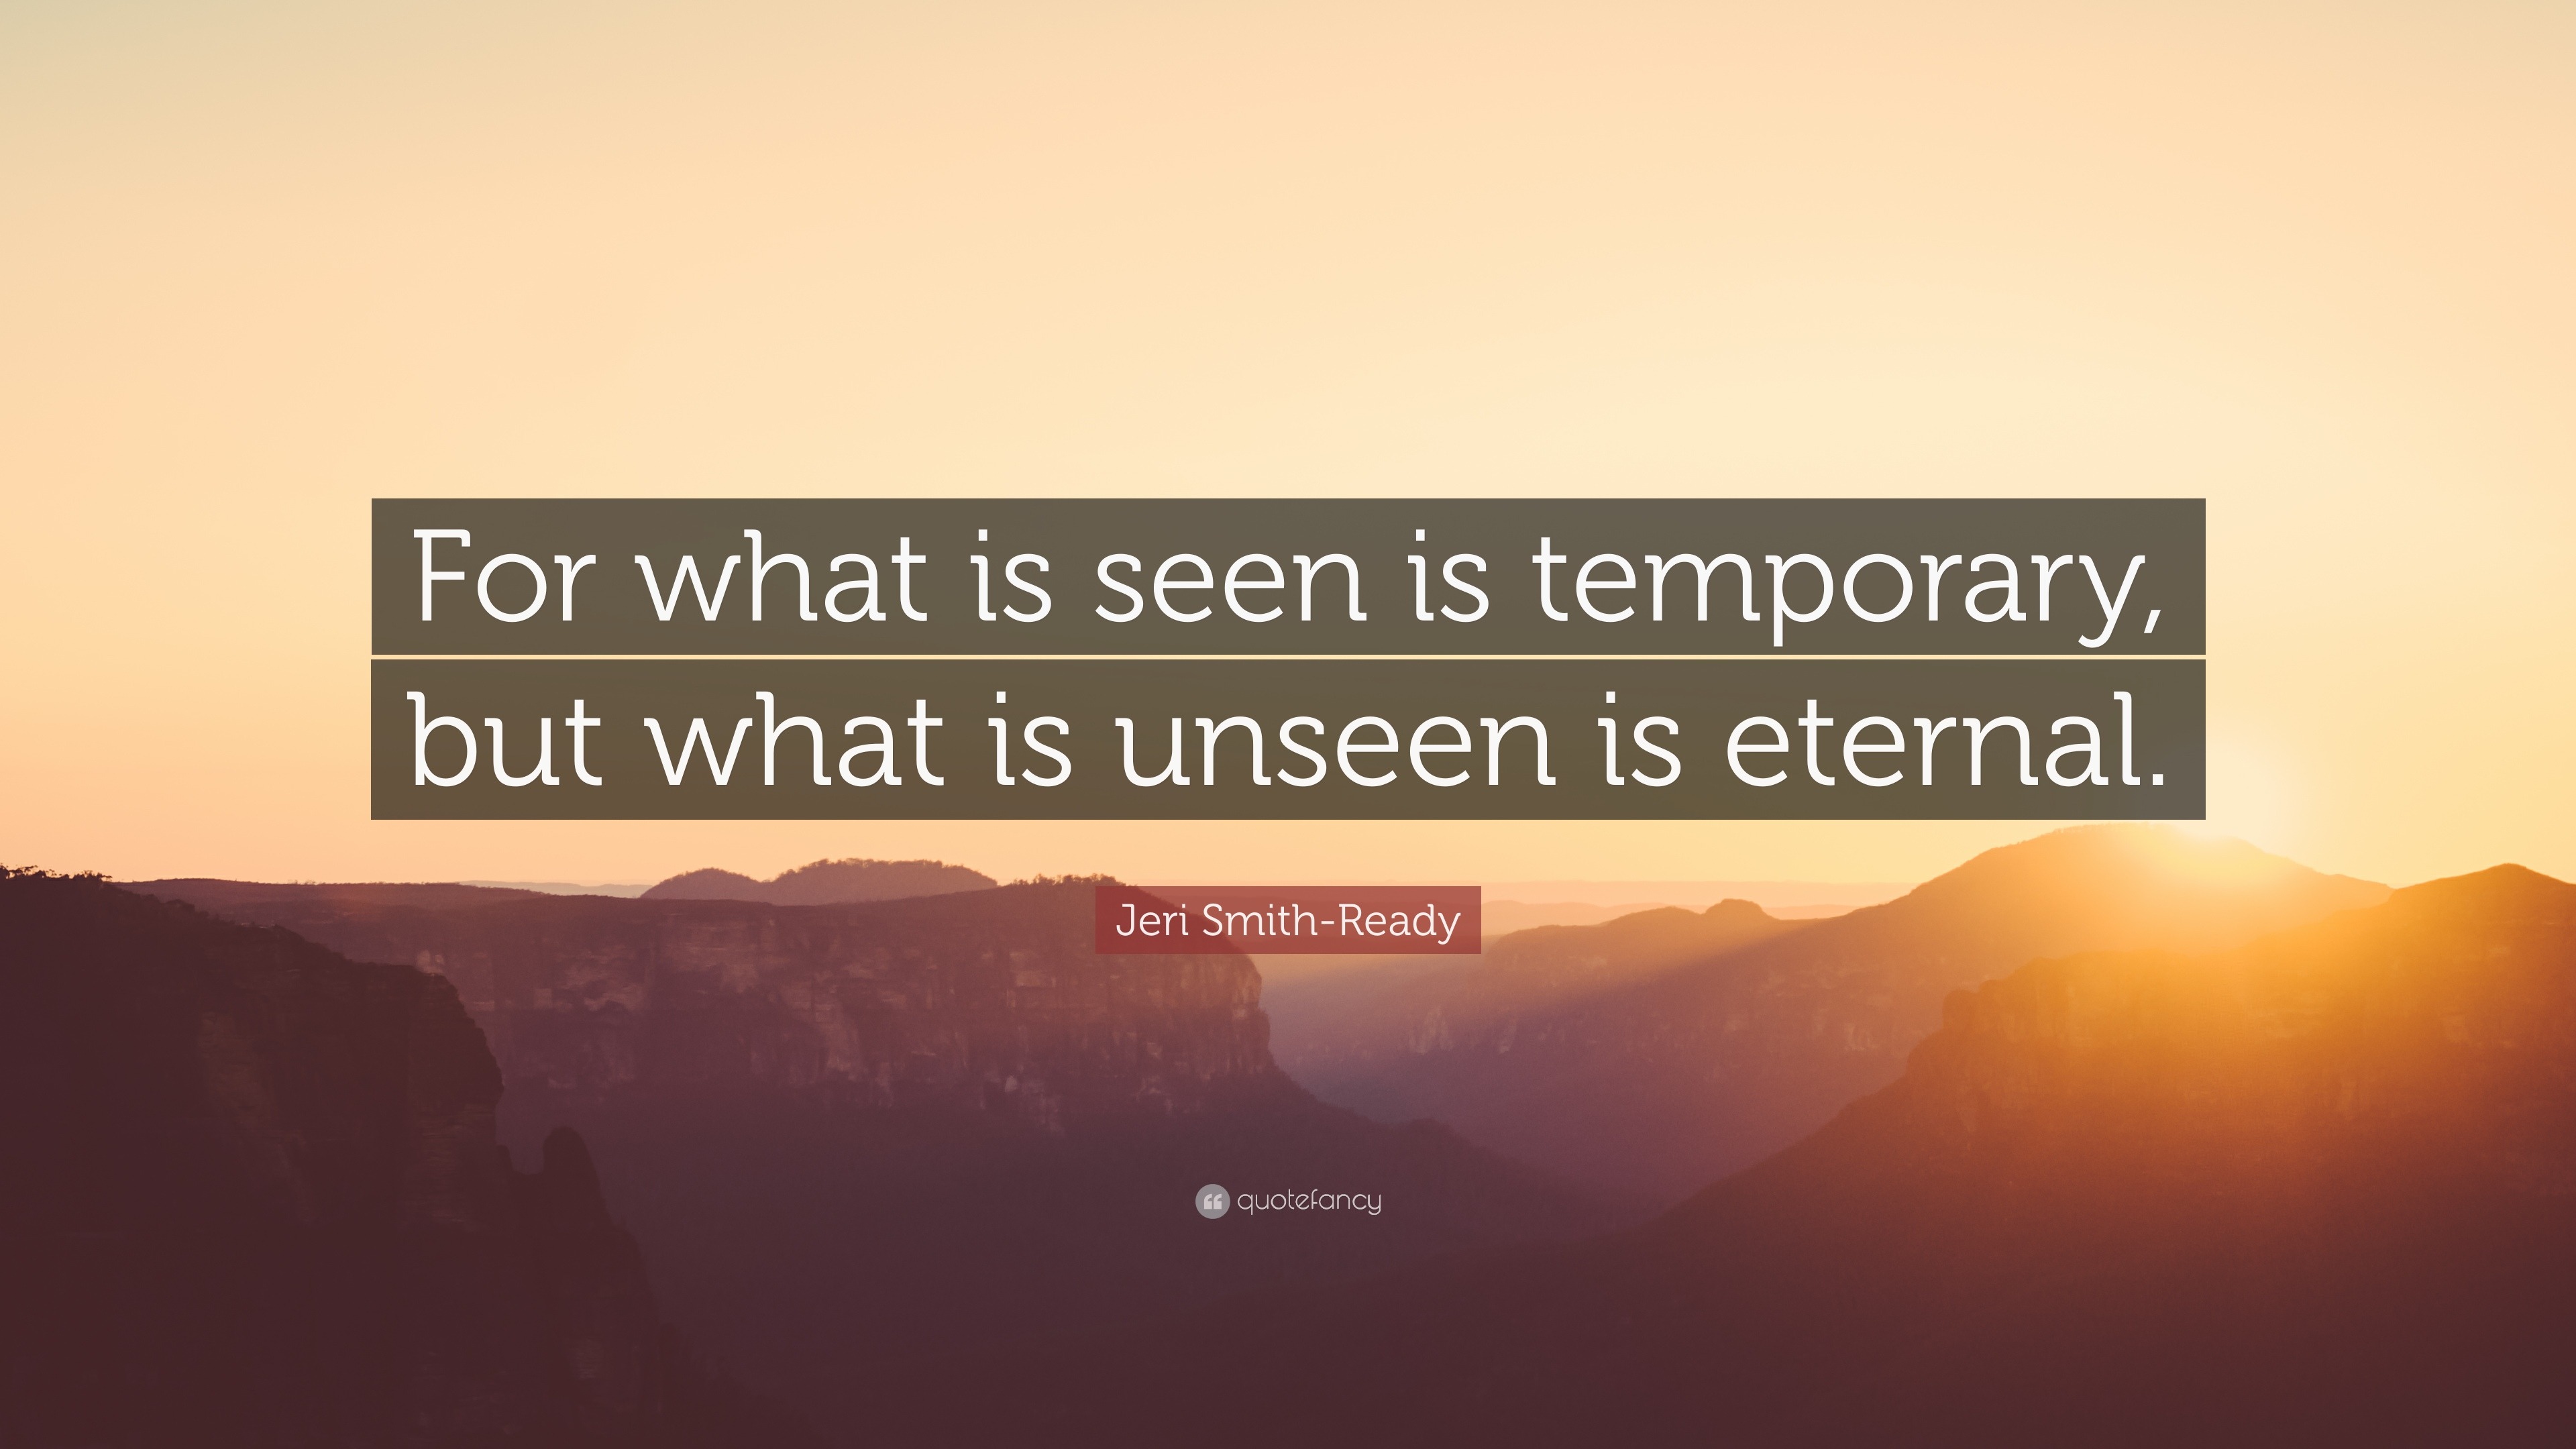 Jeri Smith-Ready Quote: “For what is seen is temporary, but what is unseen  is eternal.”